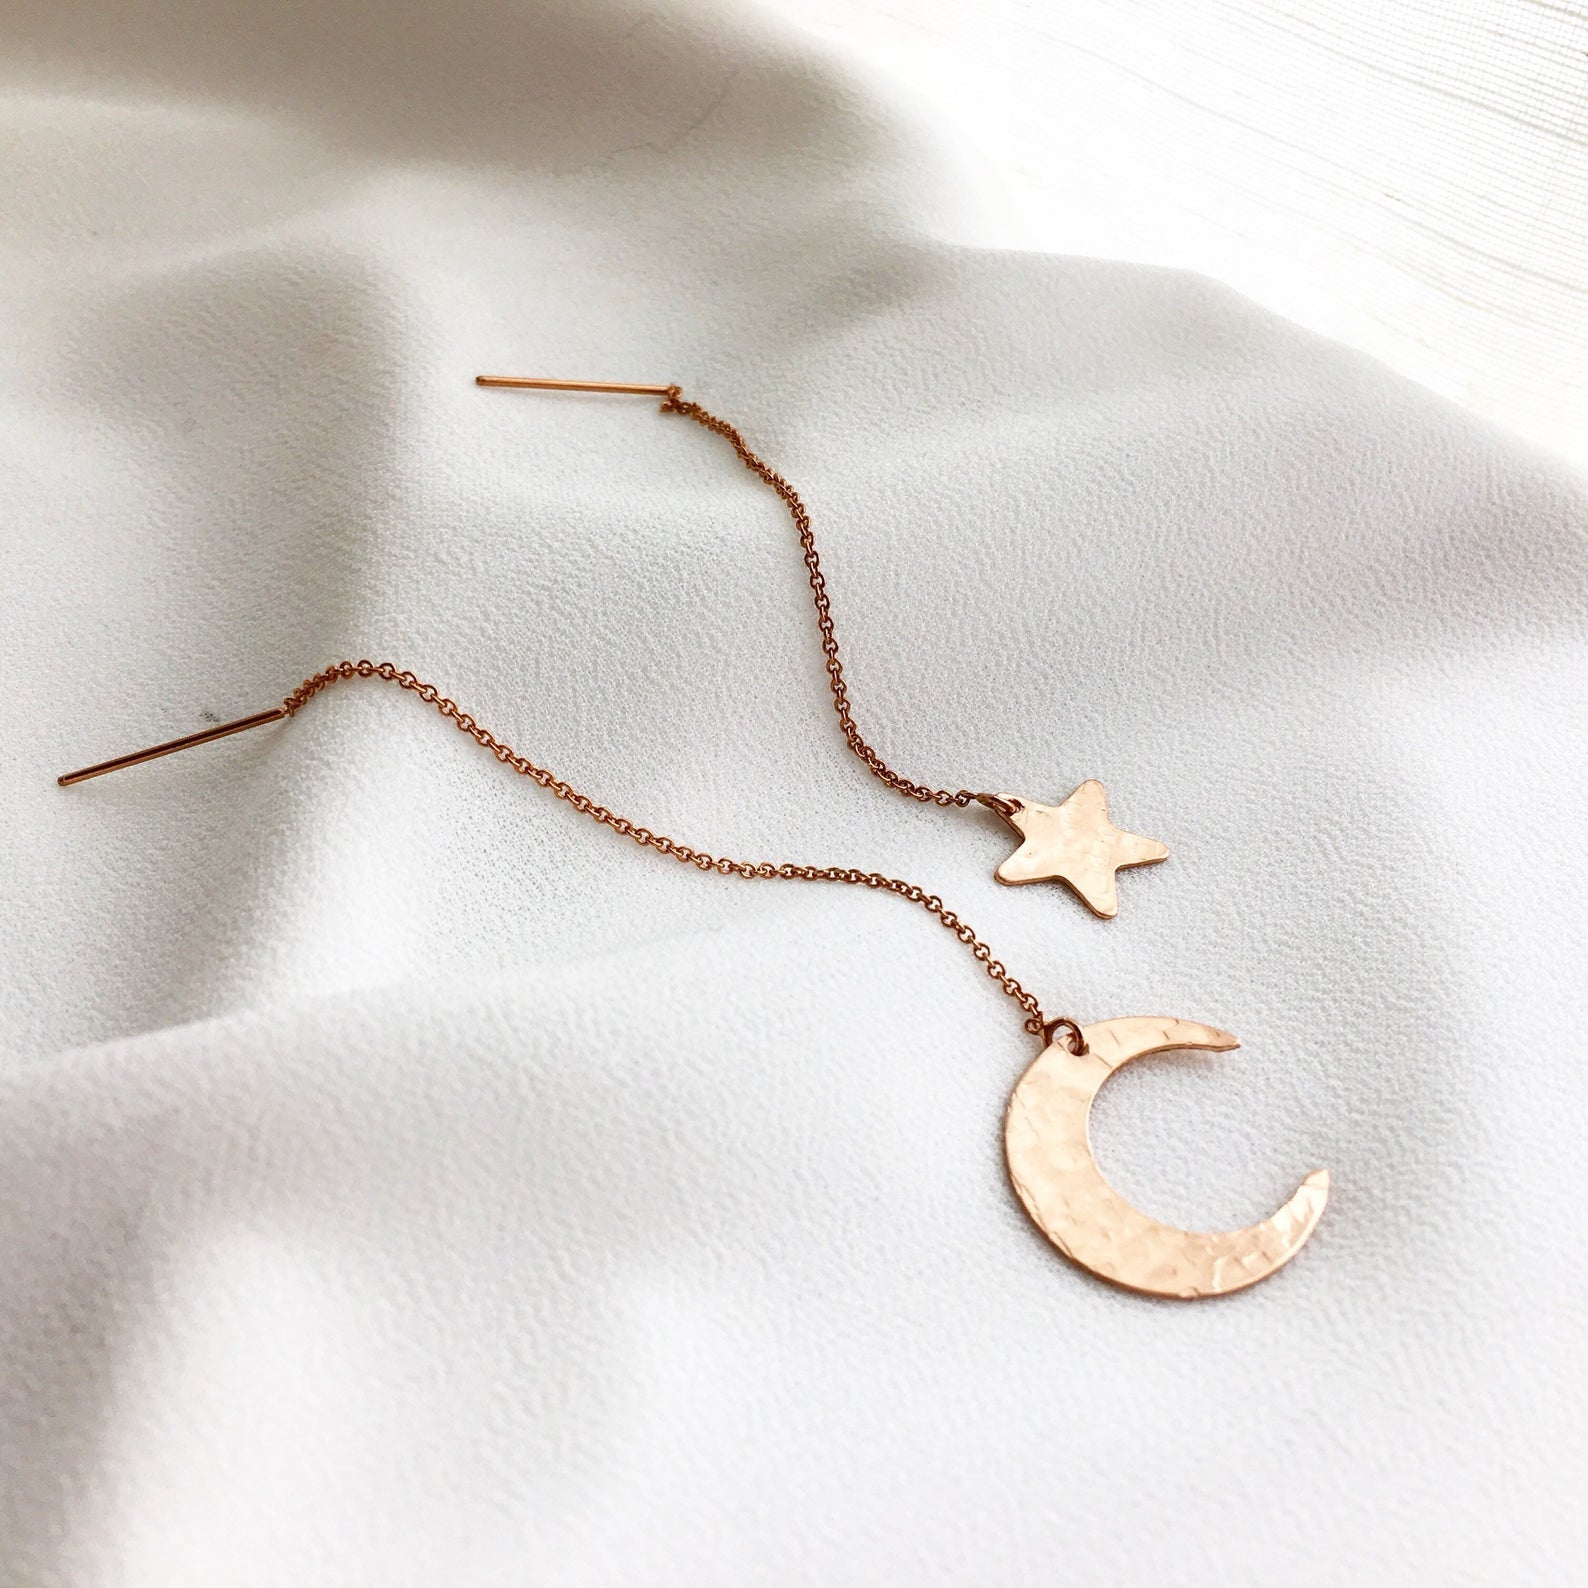 Moon and Star Ear Threader, Ear Thread, Dangling Star and Moon Earrings, In Gold, Silver &amp; Rose Gold, Star and Moon Earrings, Mothers Day Gift, Gift For her 